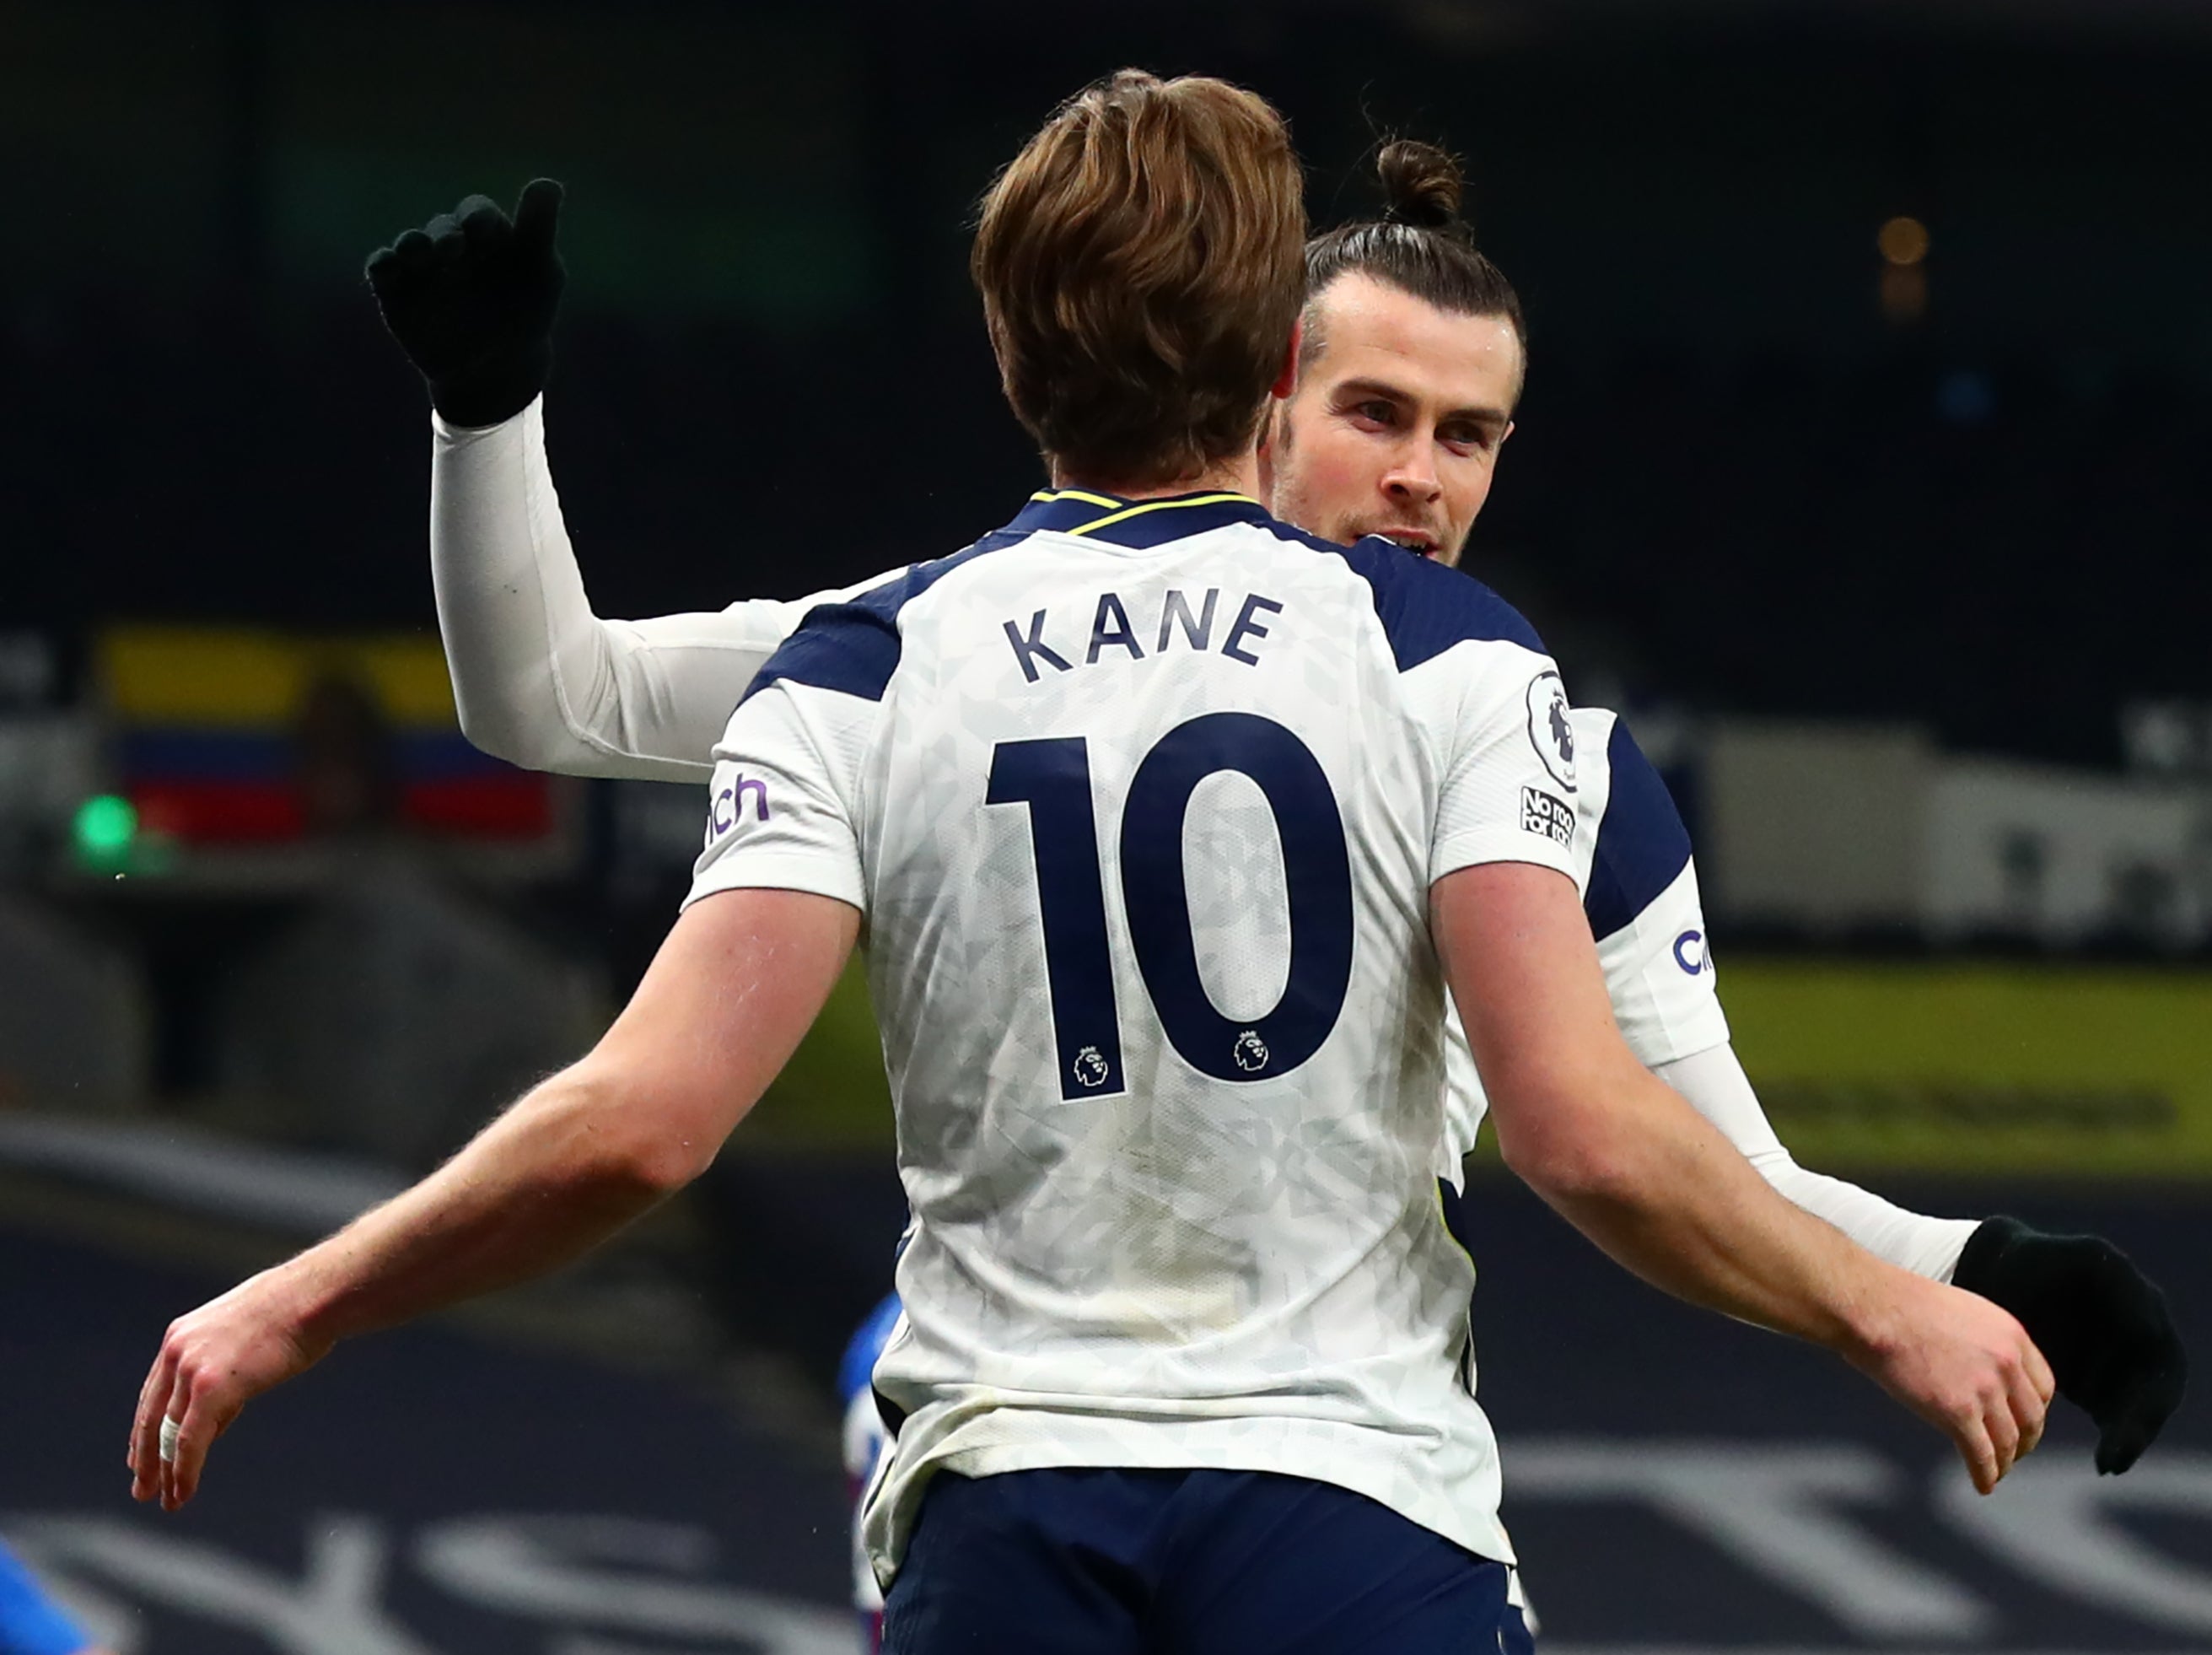 Gareth Bale scores at both ends but Tottenham see off blunt